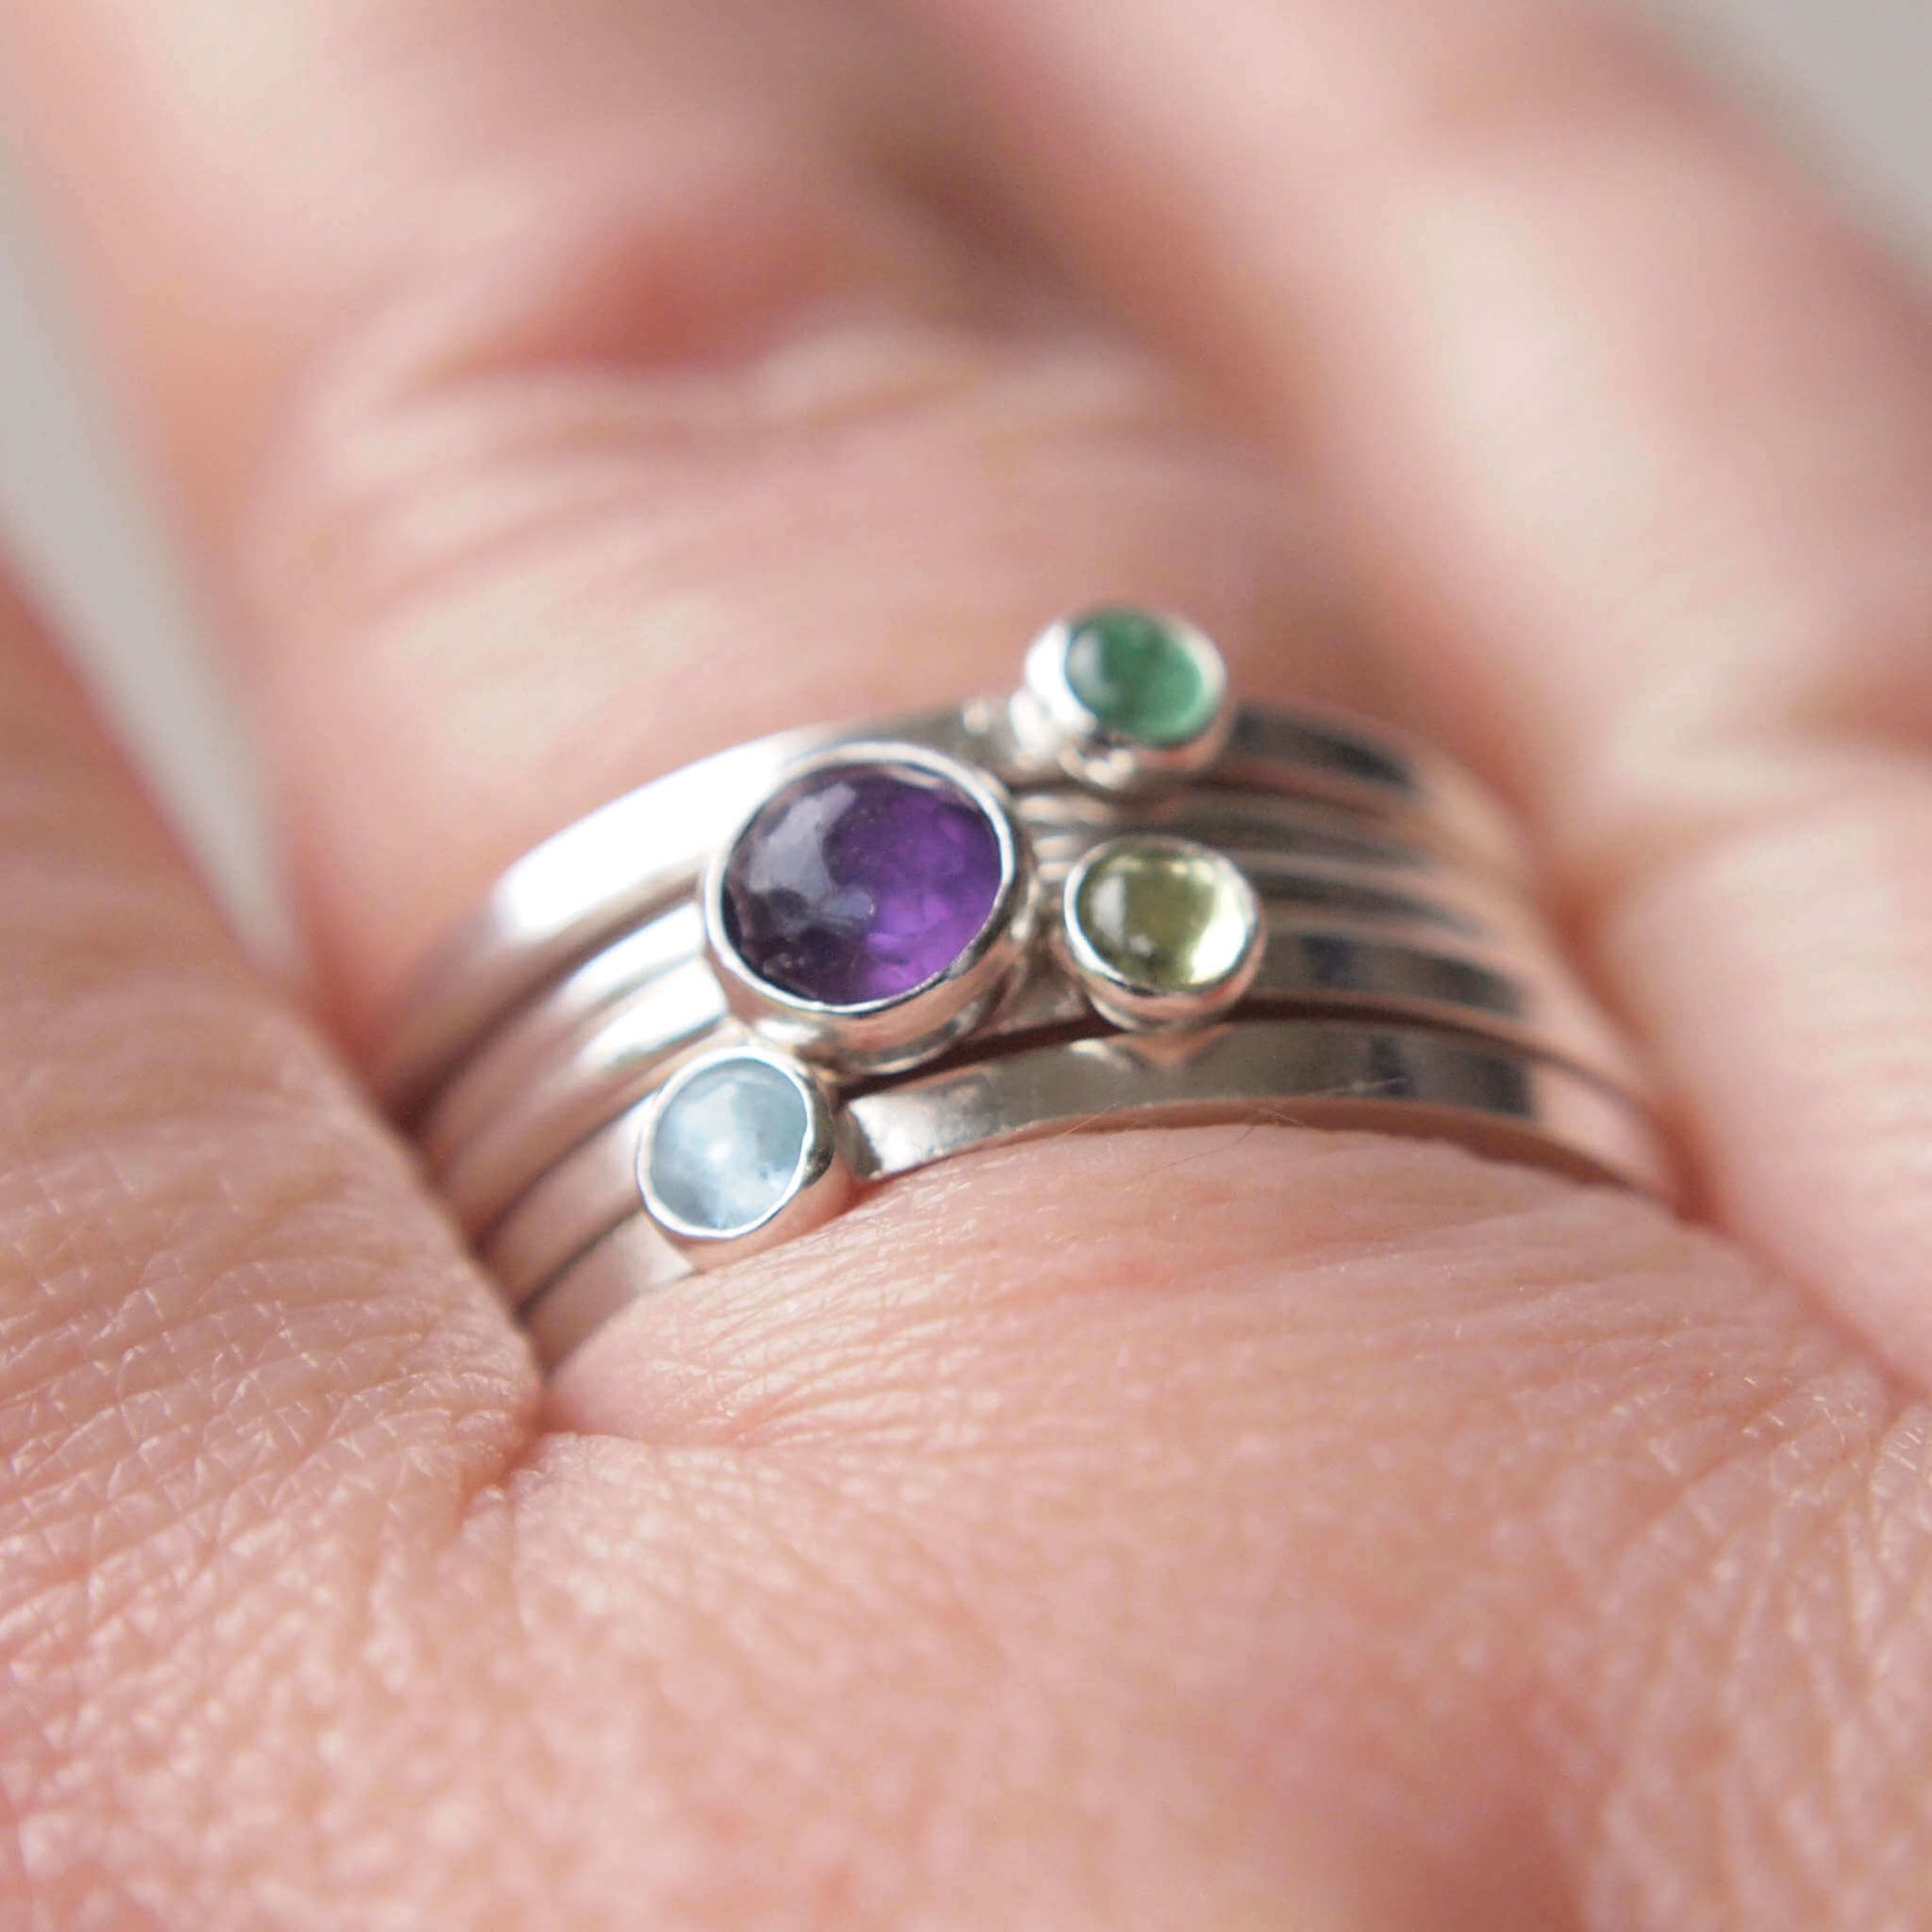 Ring set featuring four birthstones in purple, aqua, and green. The stones used are Amethyst for February, Aquamarine for March, Peridot for August and Emerald for May. The rings are made from sterling silver in a selection of band styles and different sized stones. Handmade in Scotland by maram jewellery